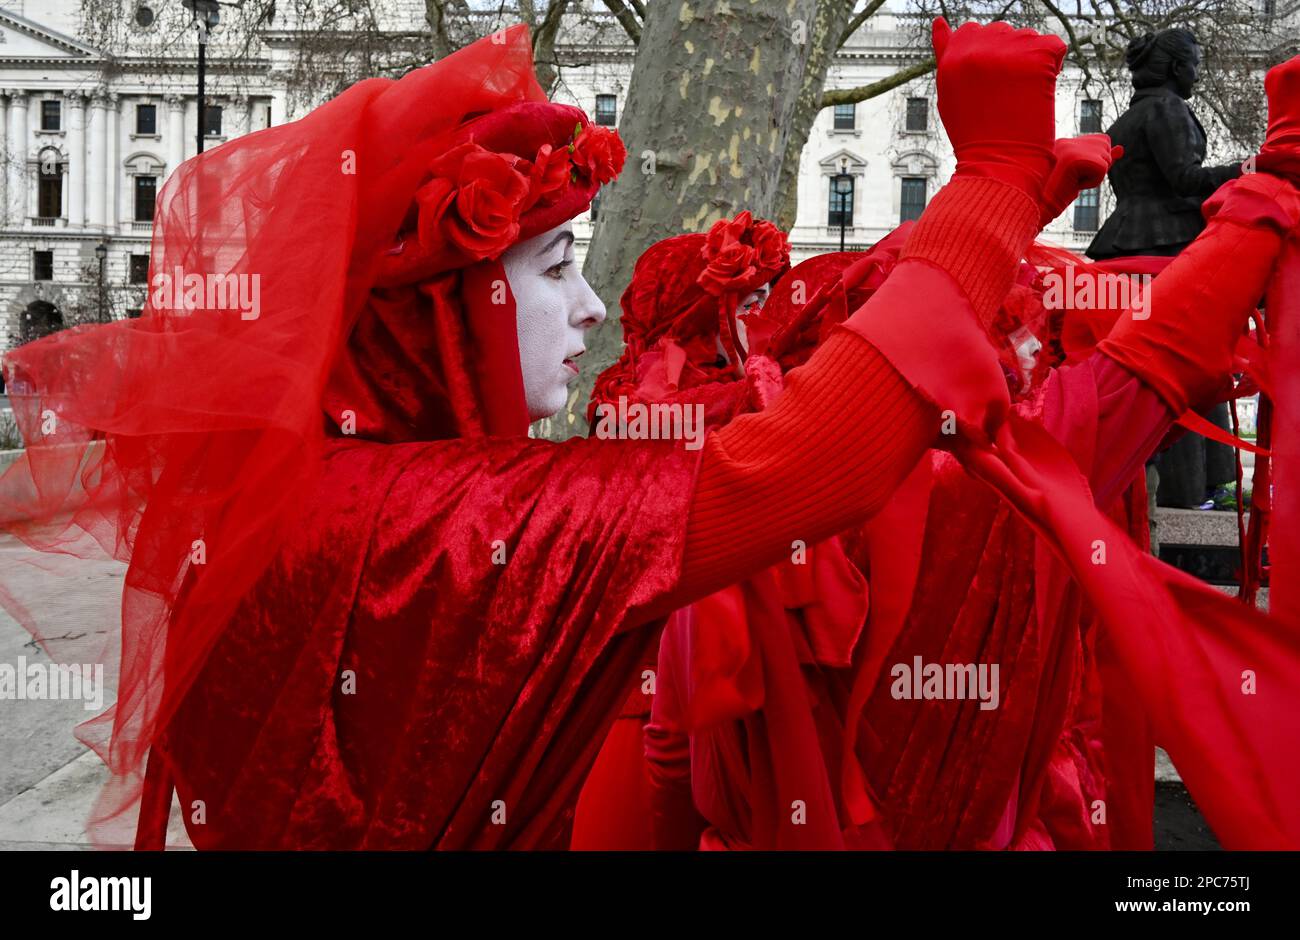 London, UK. Red Rebel Brigade. Extinction Rebellion protested in Parliament Square against the UK Government's blocking of a law that requires water companies to refrain from dumping raw sewage in our waterways and seas. Credit: michael melia/Alamy Live News Stock Photo